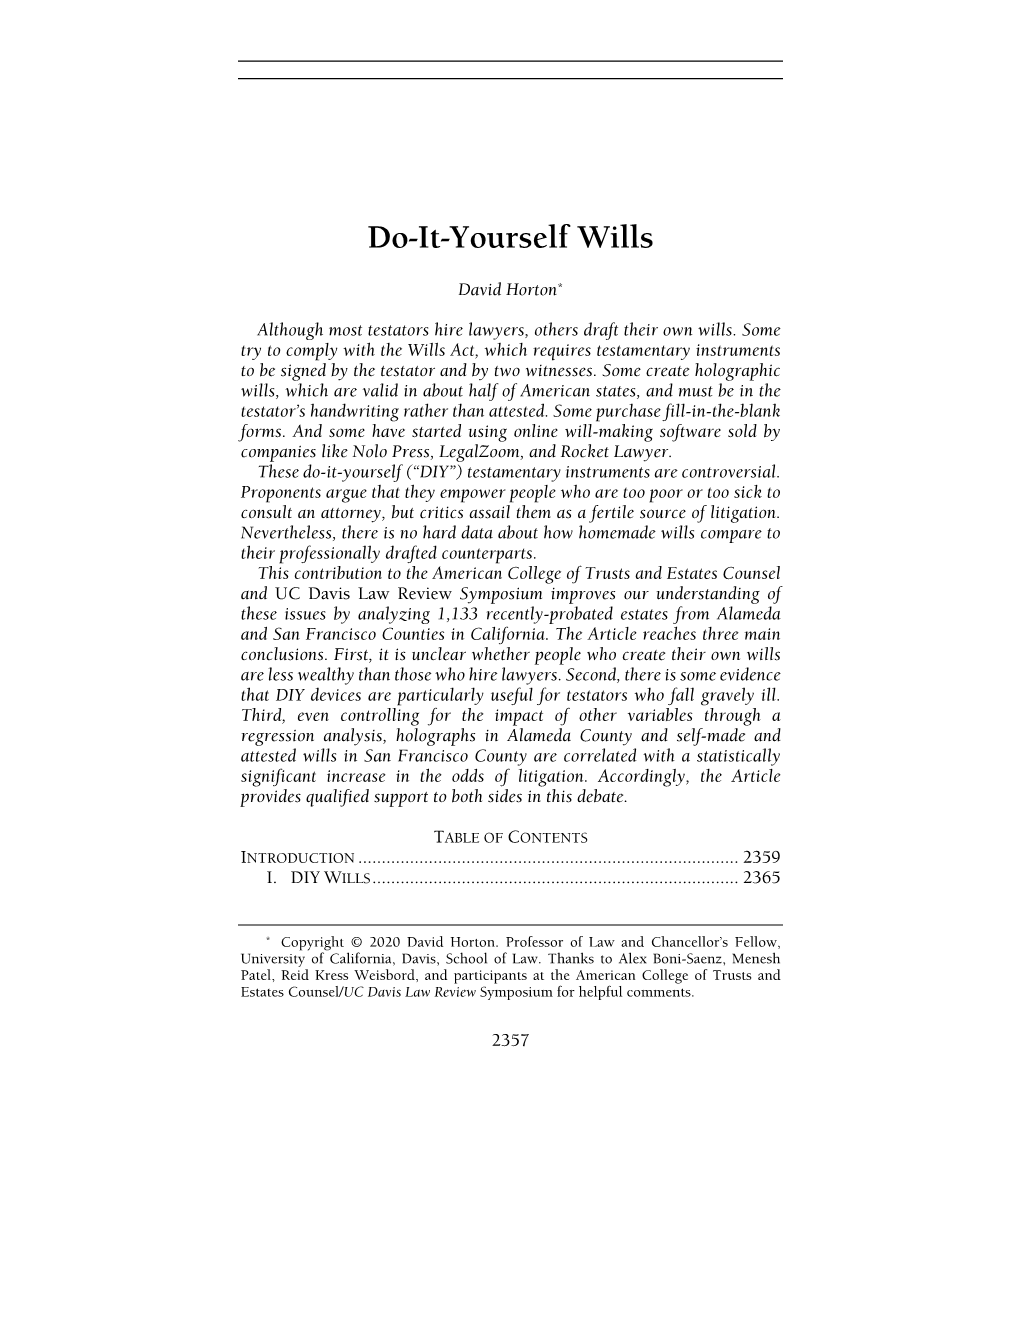 Do-It-Yourself Wills